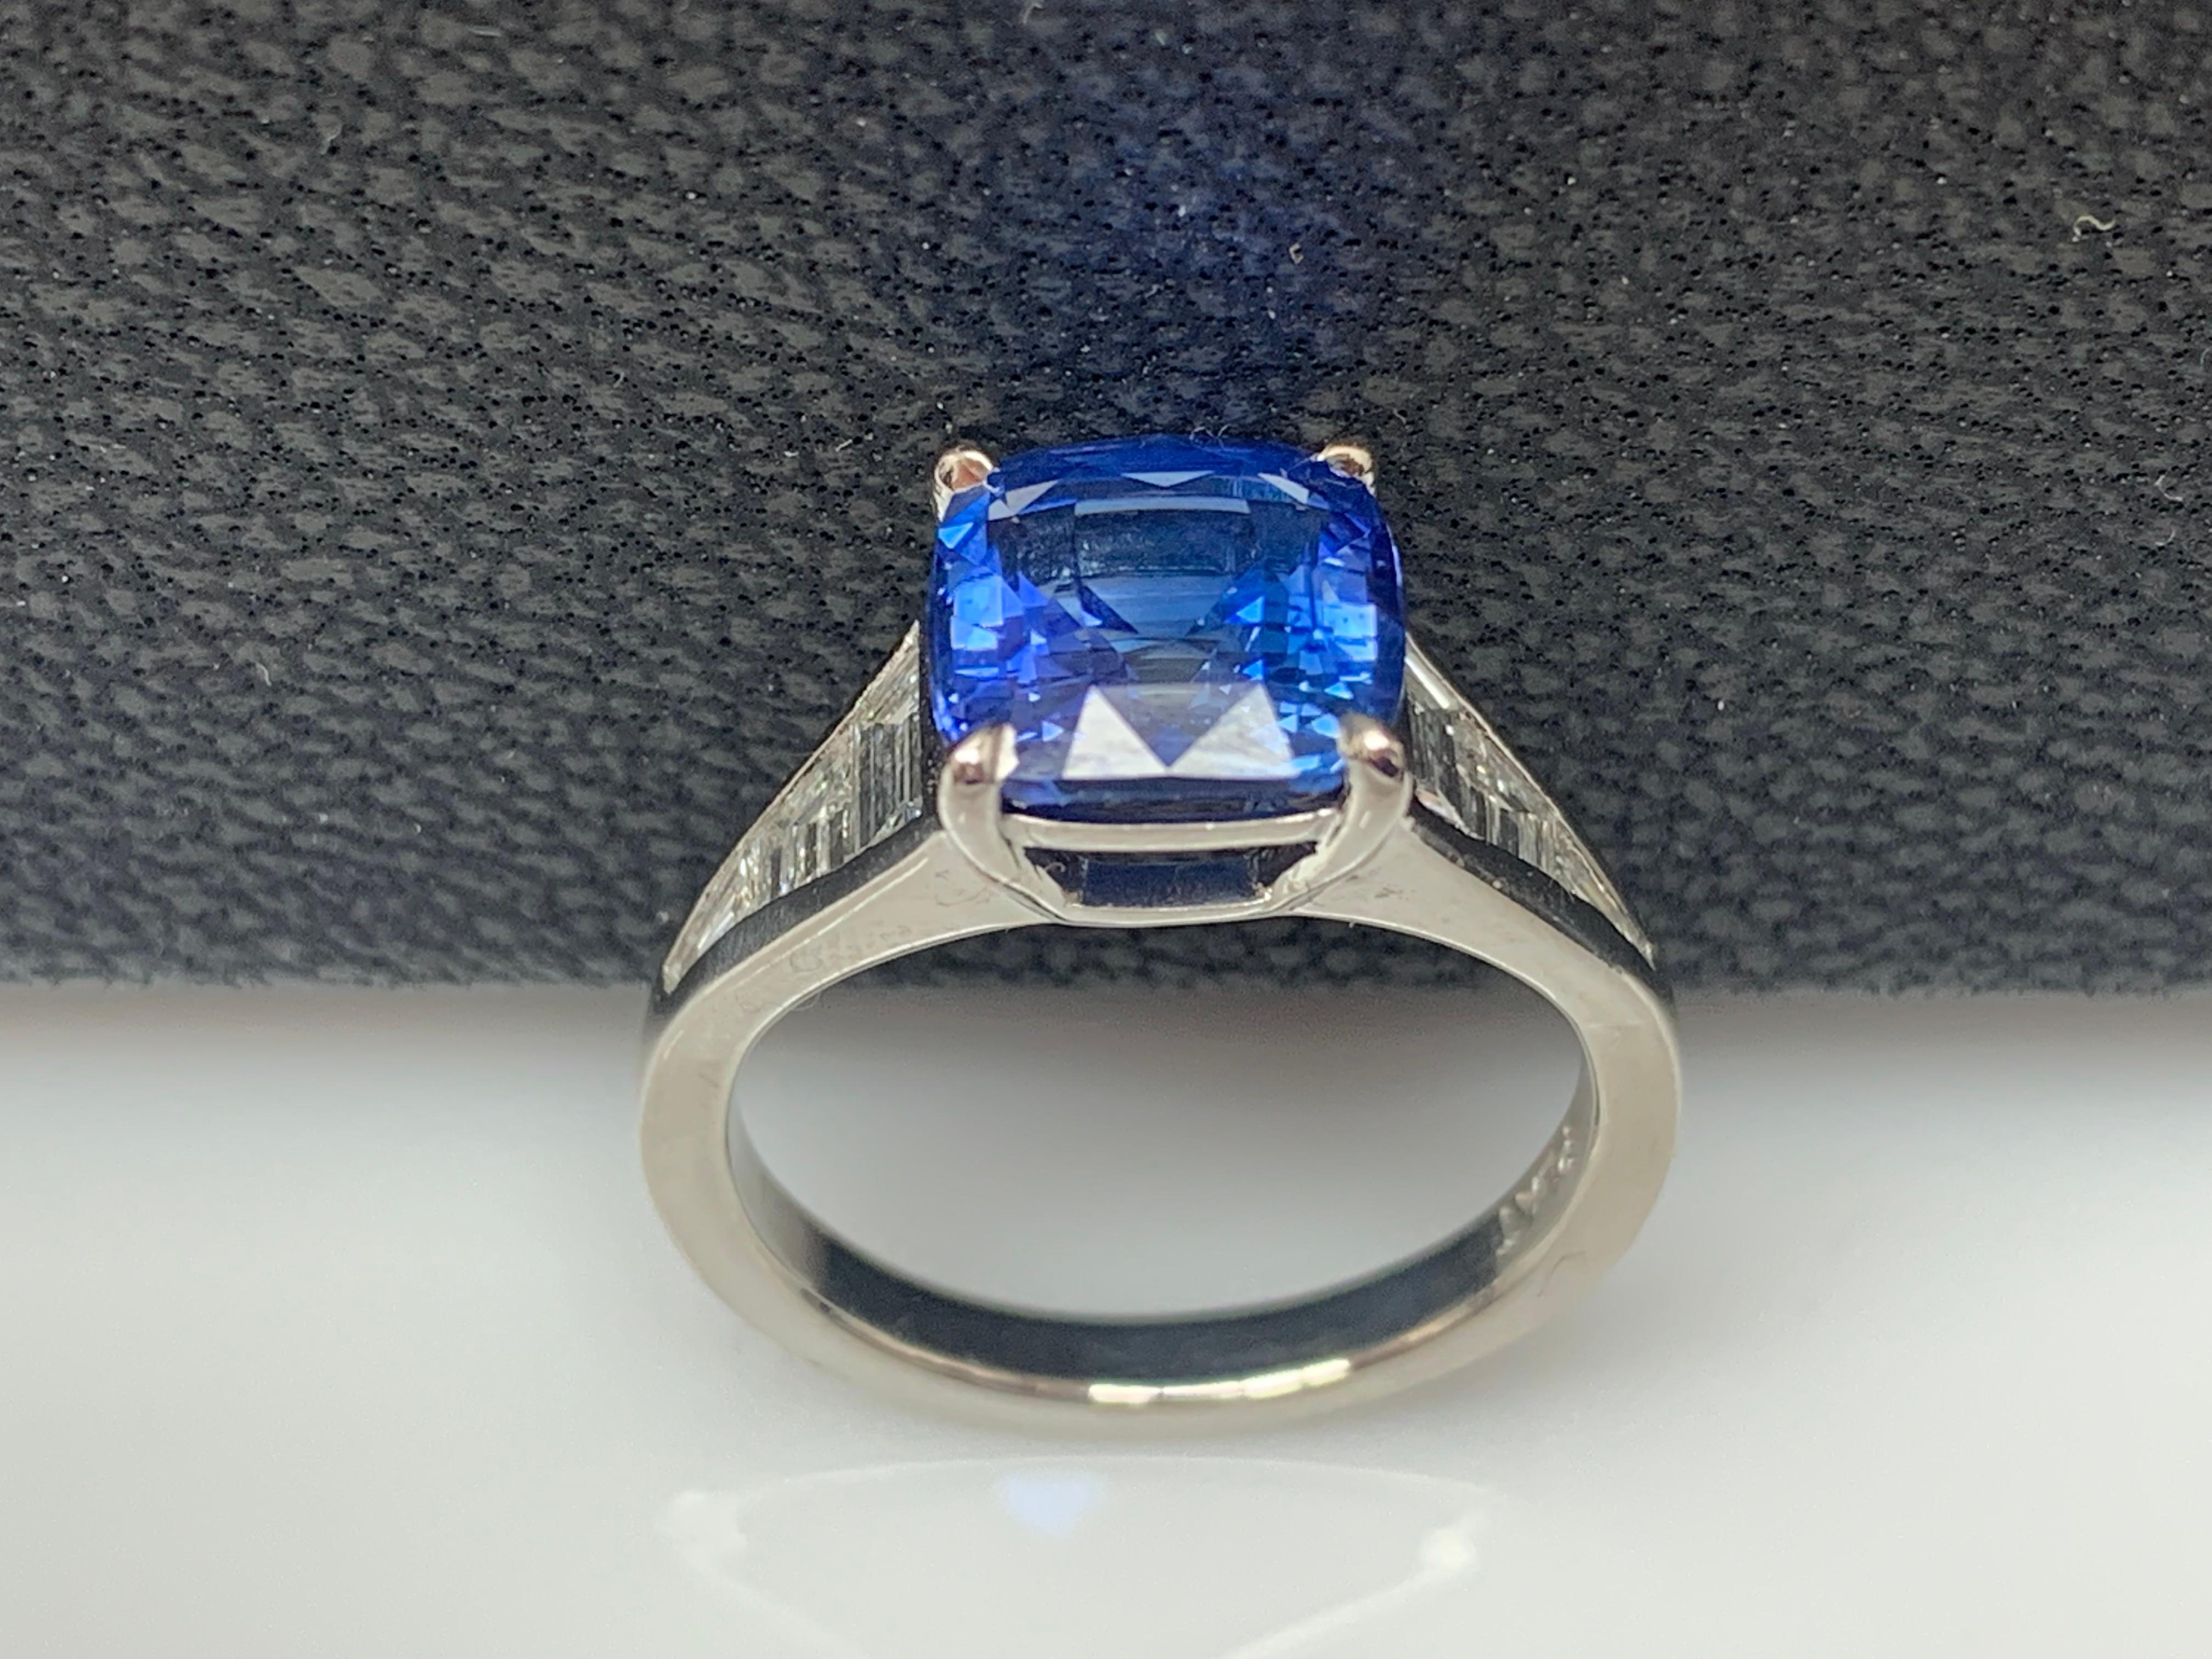 A stunning well-crafted engagement ring showcasing a 3.39-carat Cushion Cut Blue Sapphire. Flanking the center diamond are perfectly matched graduating step-cut diamonds, channel set in a polished platinum mounting. 6 Accent diamonds weigh 0.61